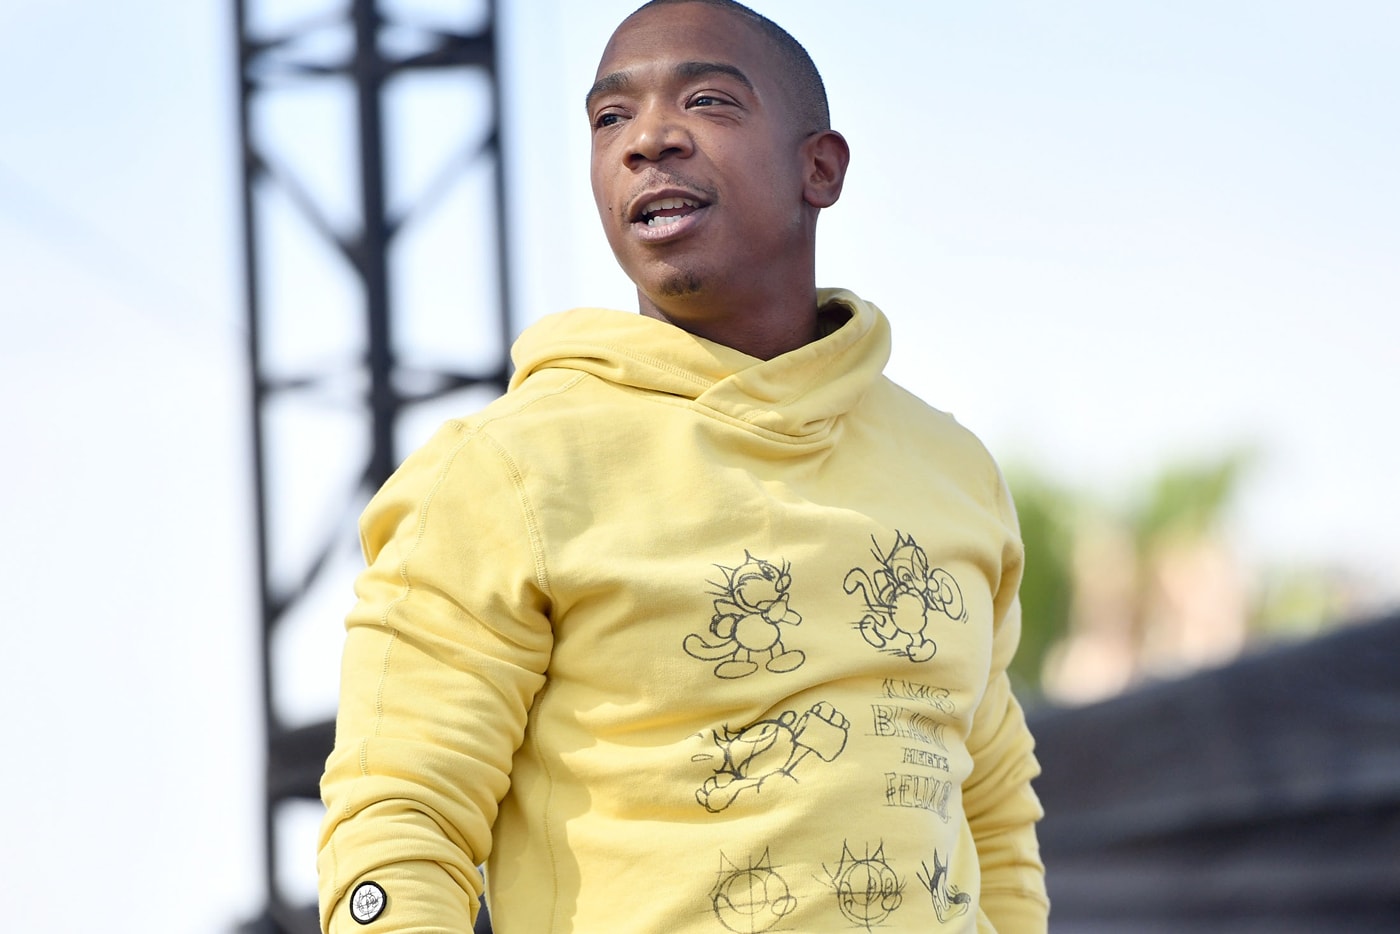 The Ridiculous Pitch Deck for Ja Rule's Fyre Festival has Leaked